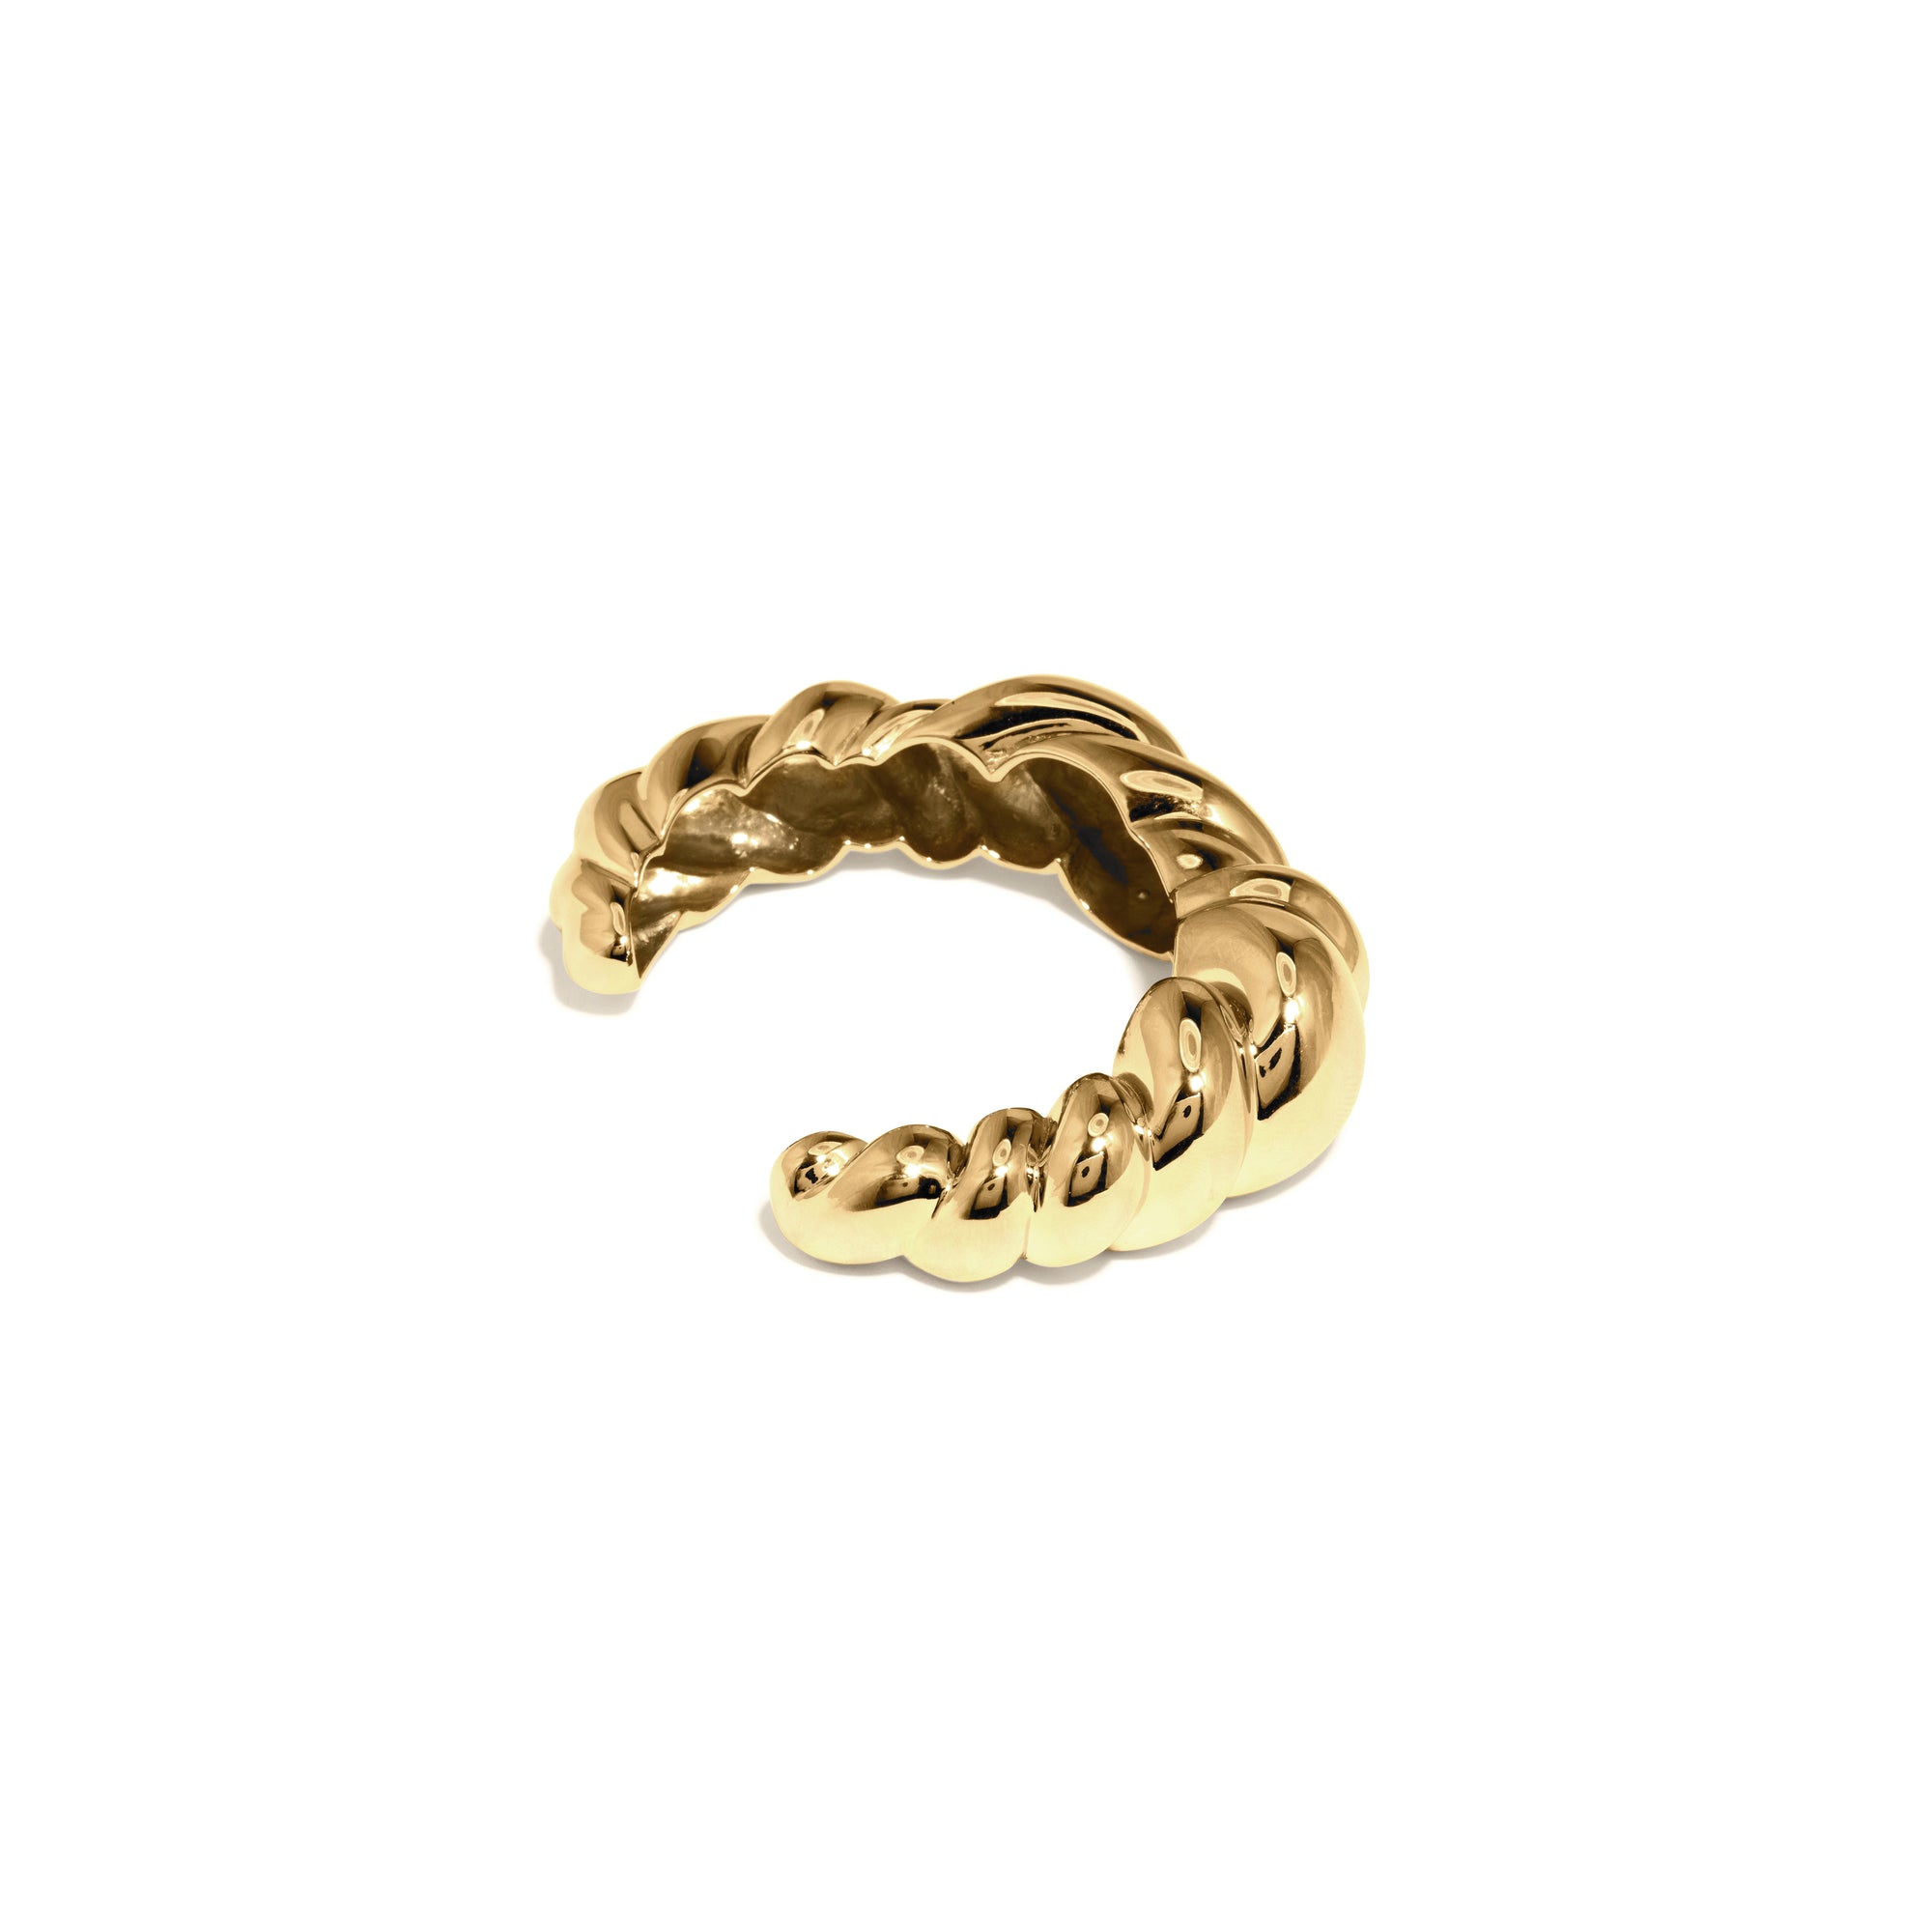 Completedworks - Women's Meandering Bracelet - (Yellow Gold) view 3